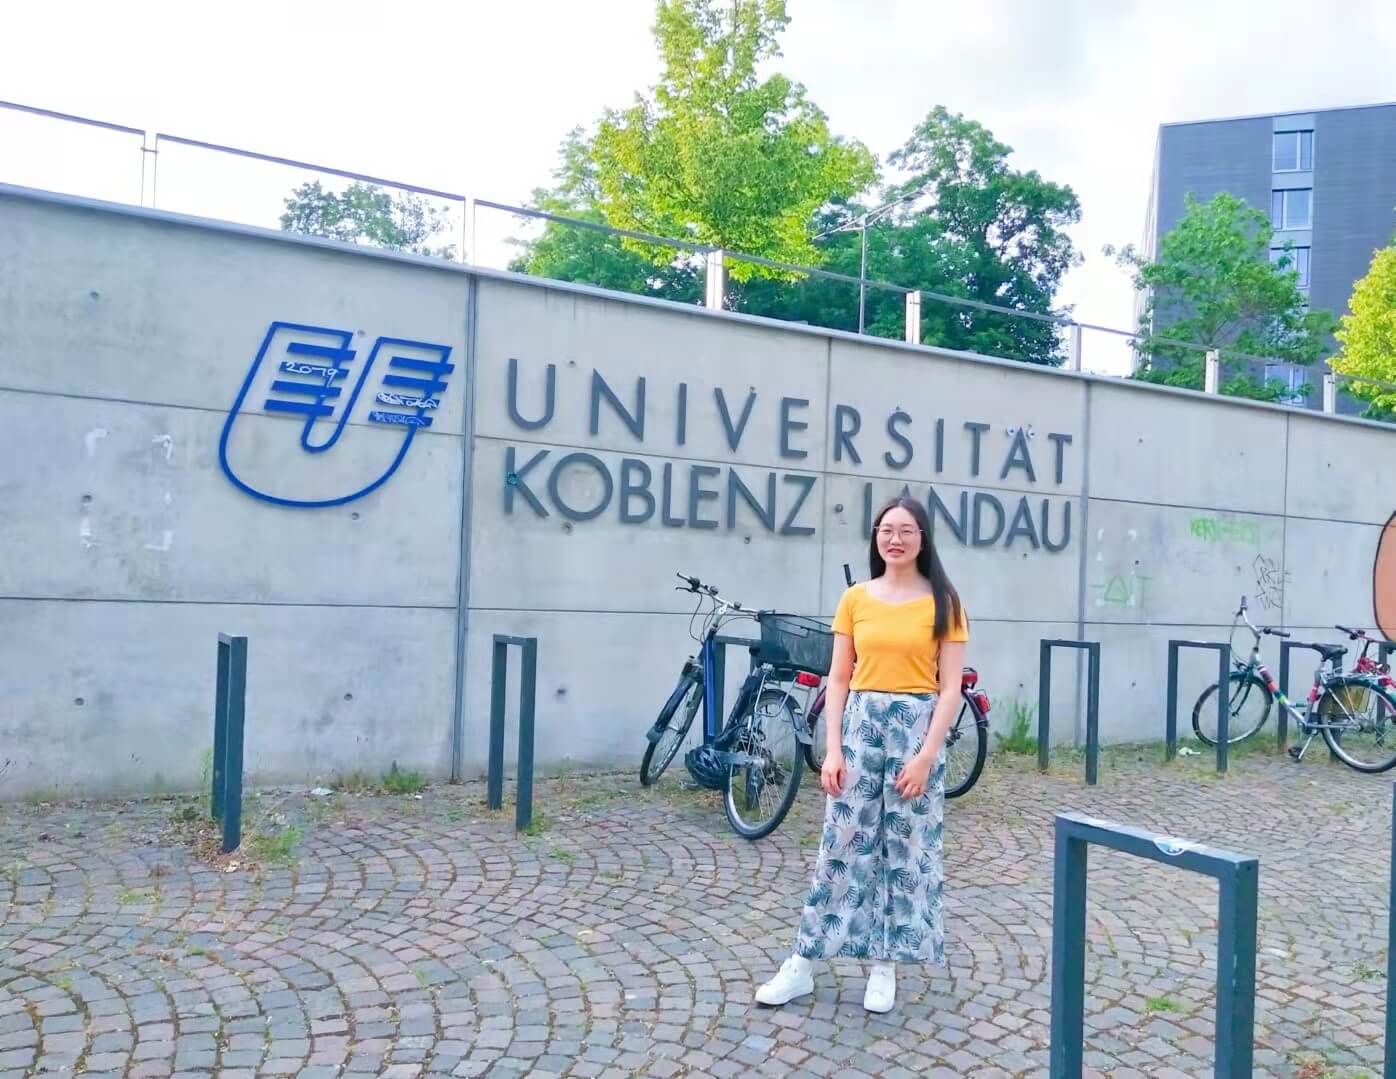 From a rural village in China to a prestigious institution in Germany